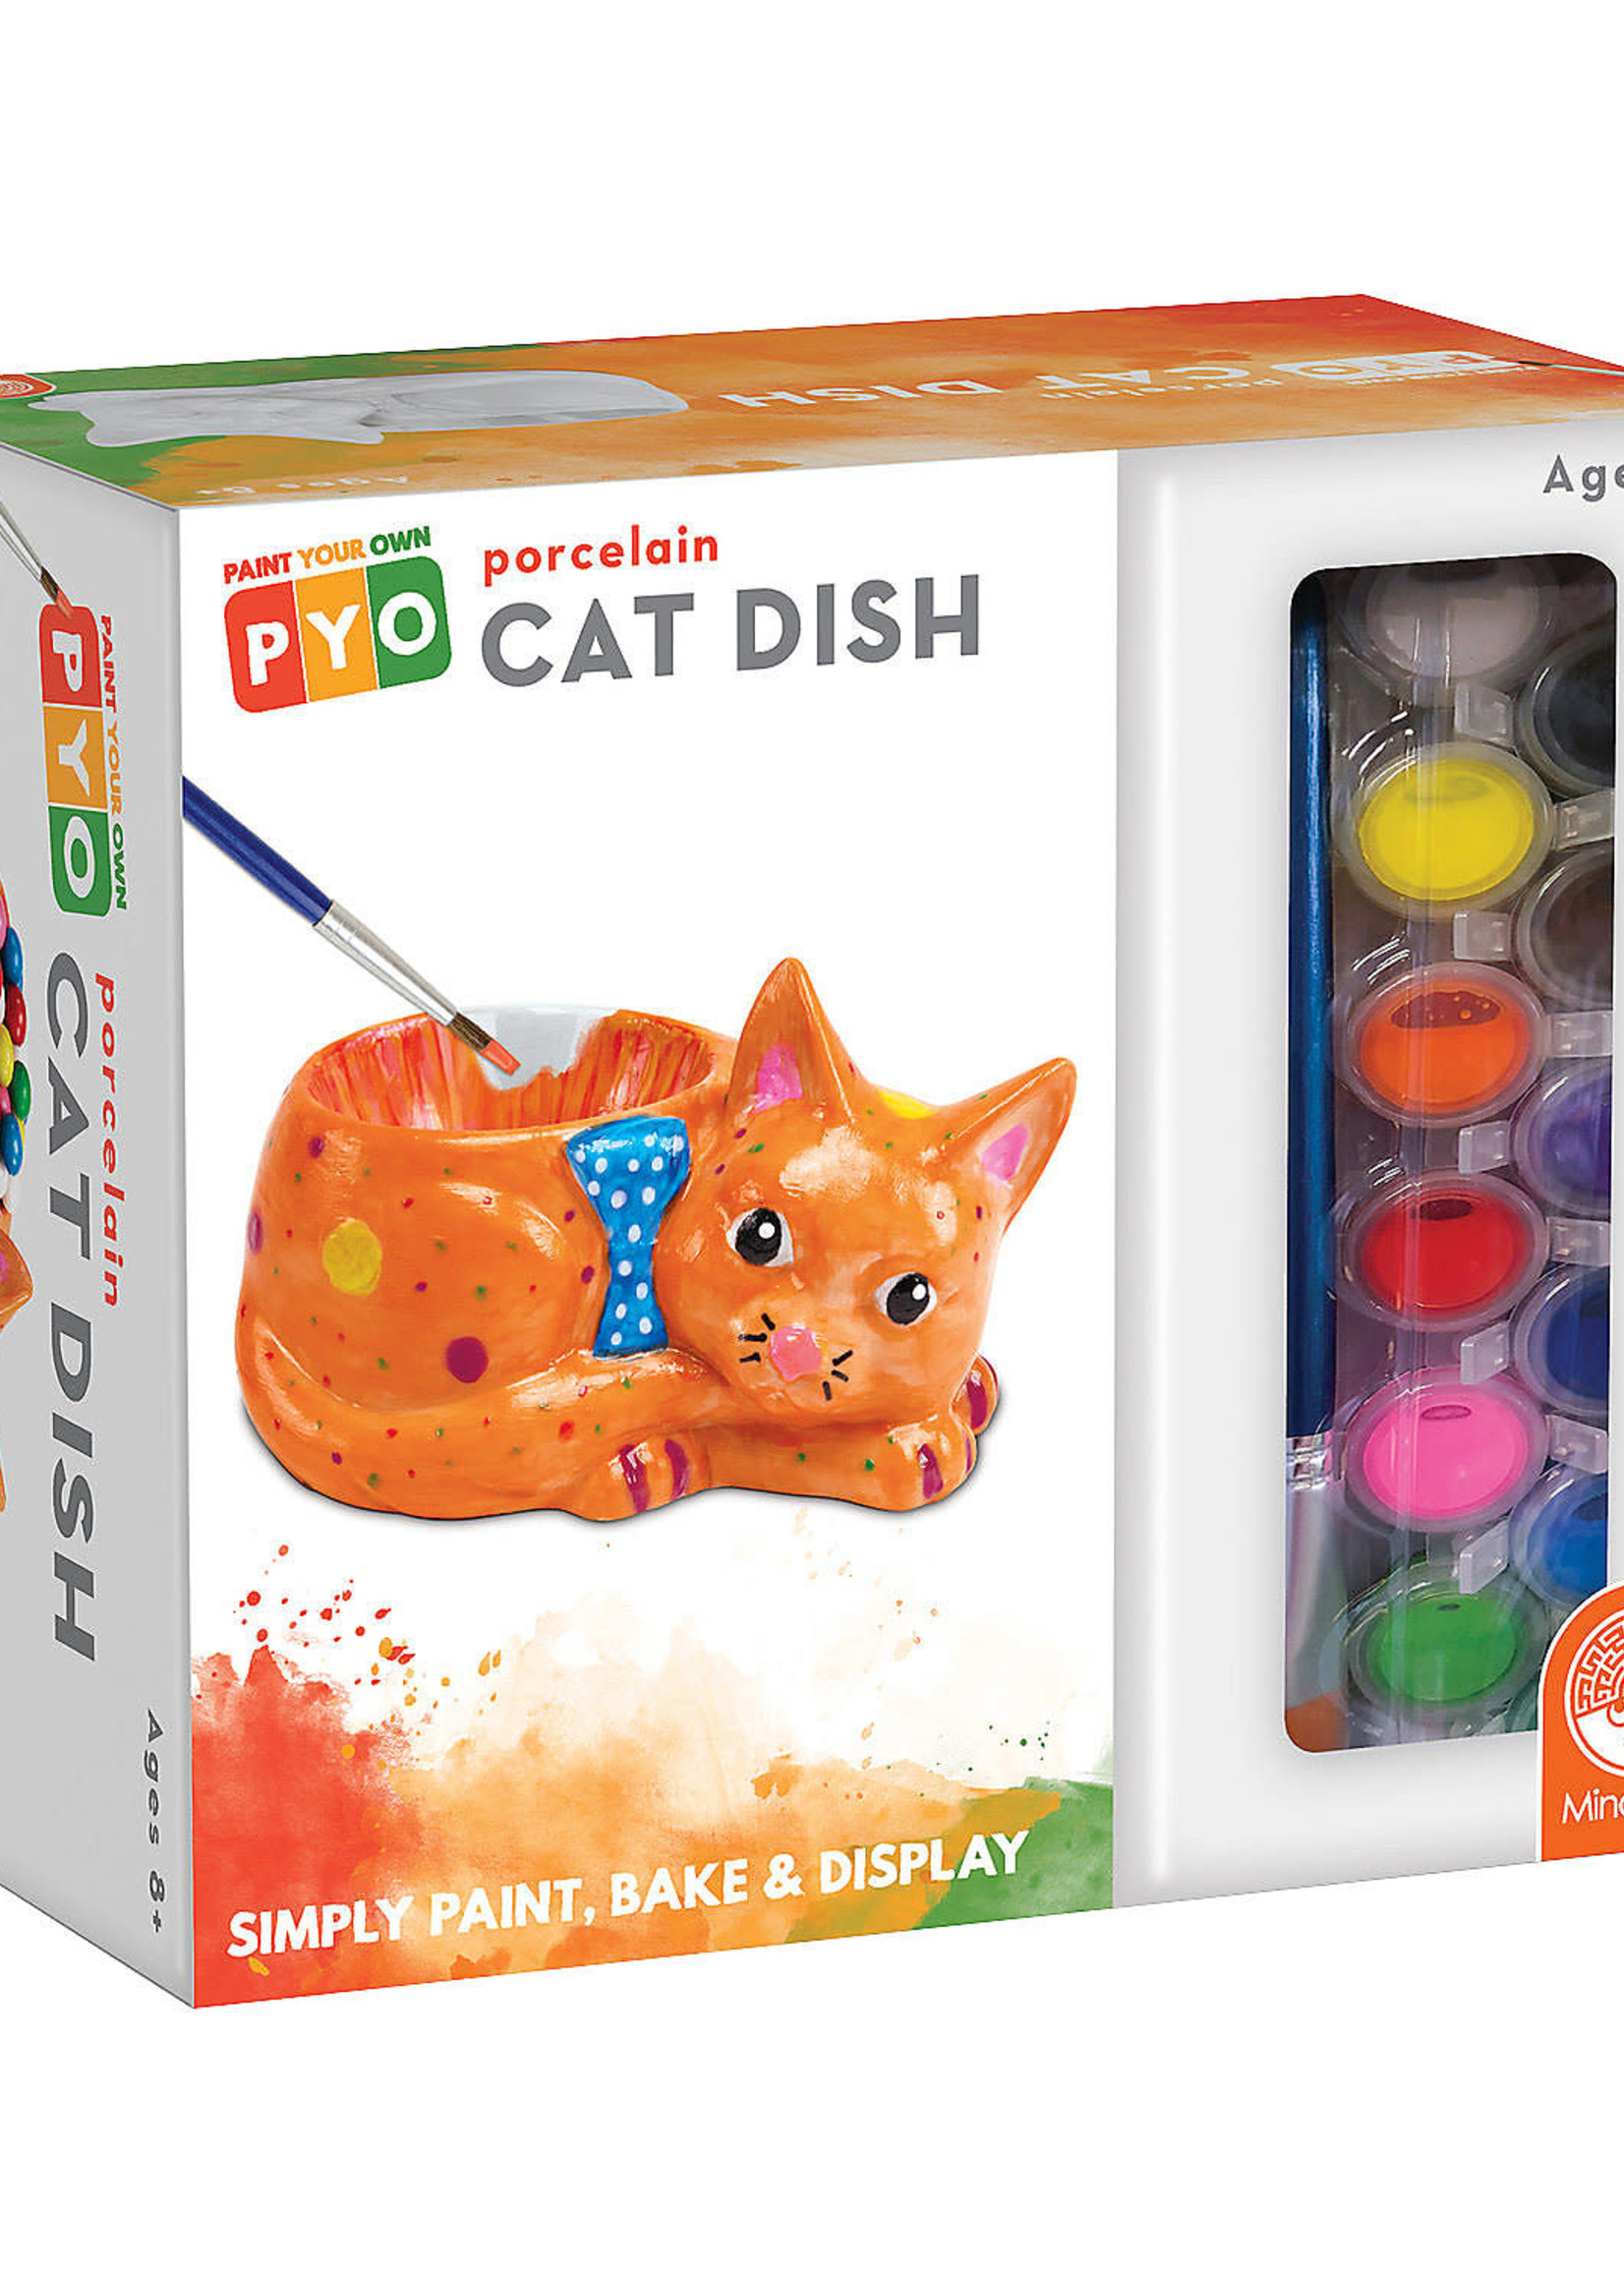 Paint Your Own Cat Dish